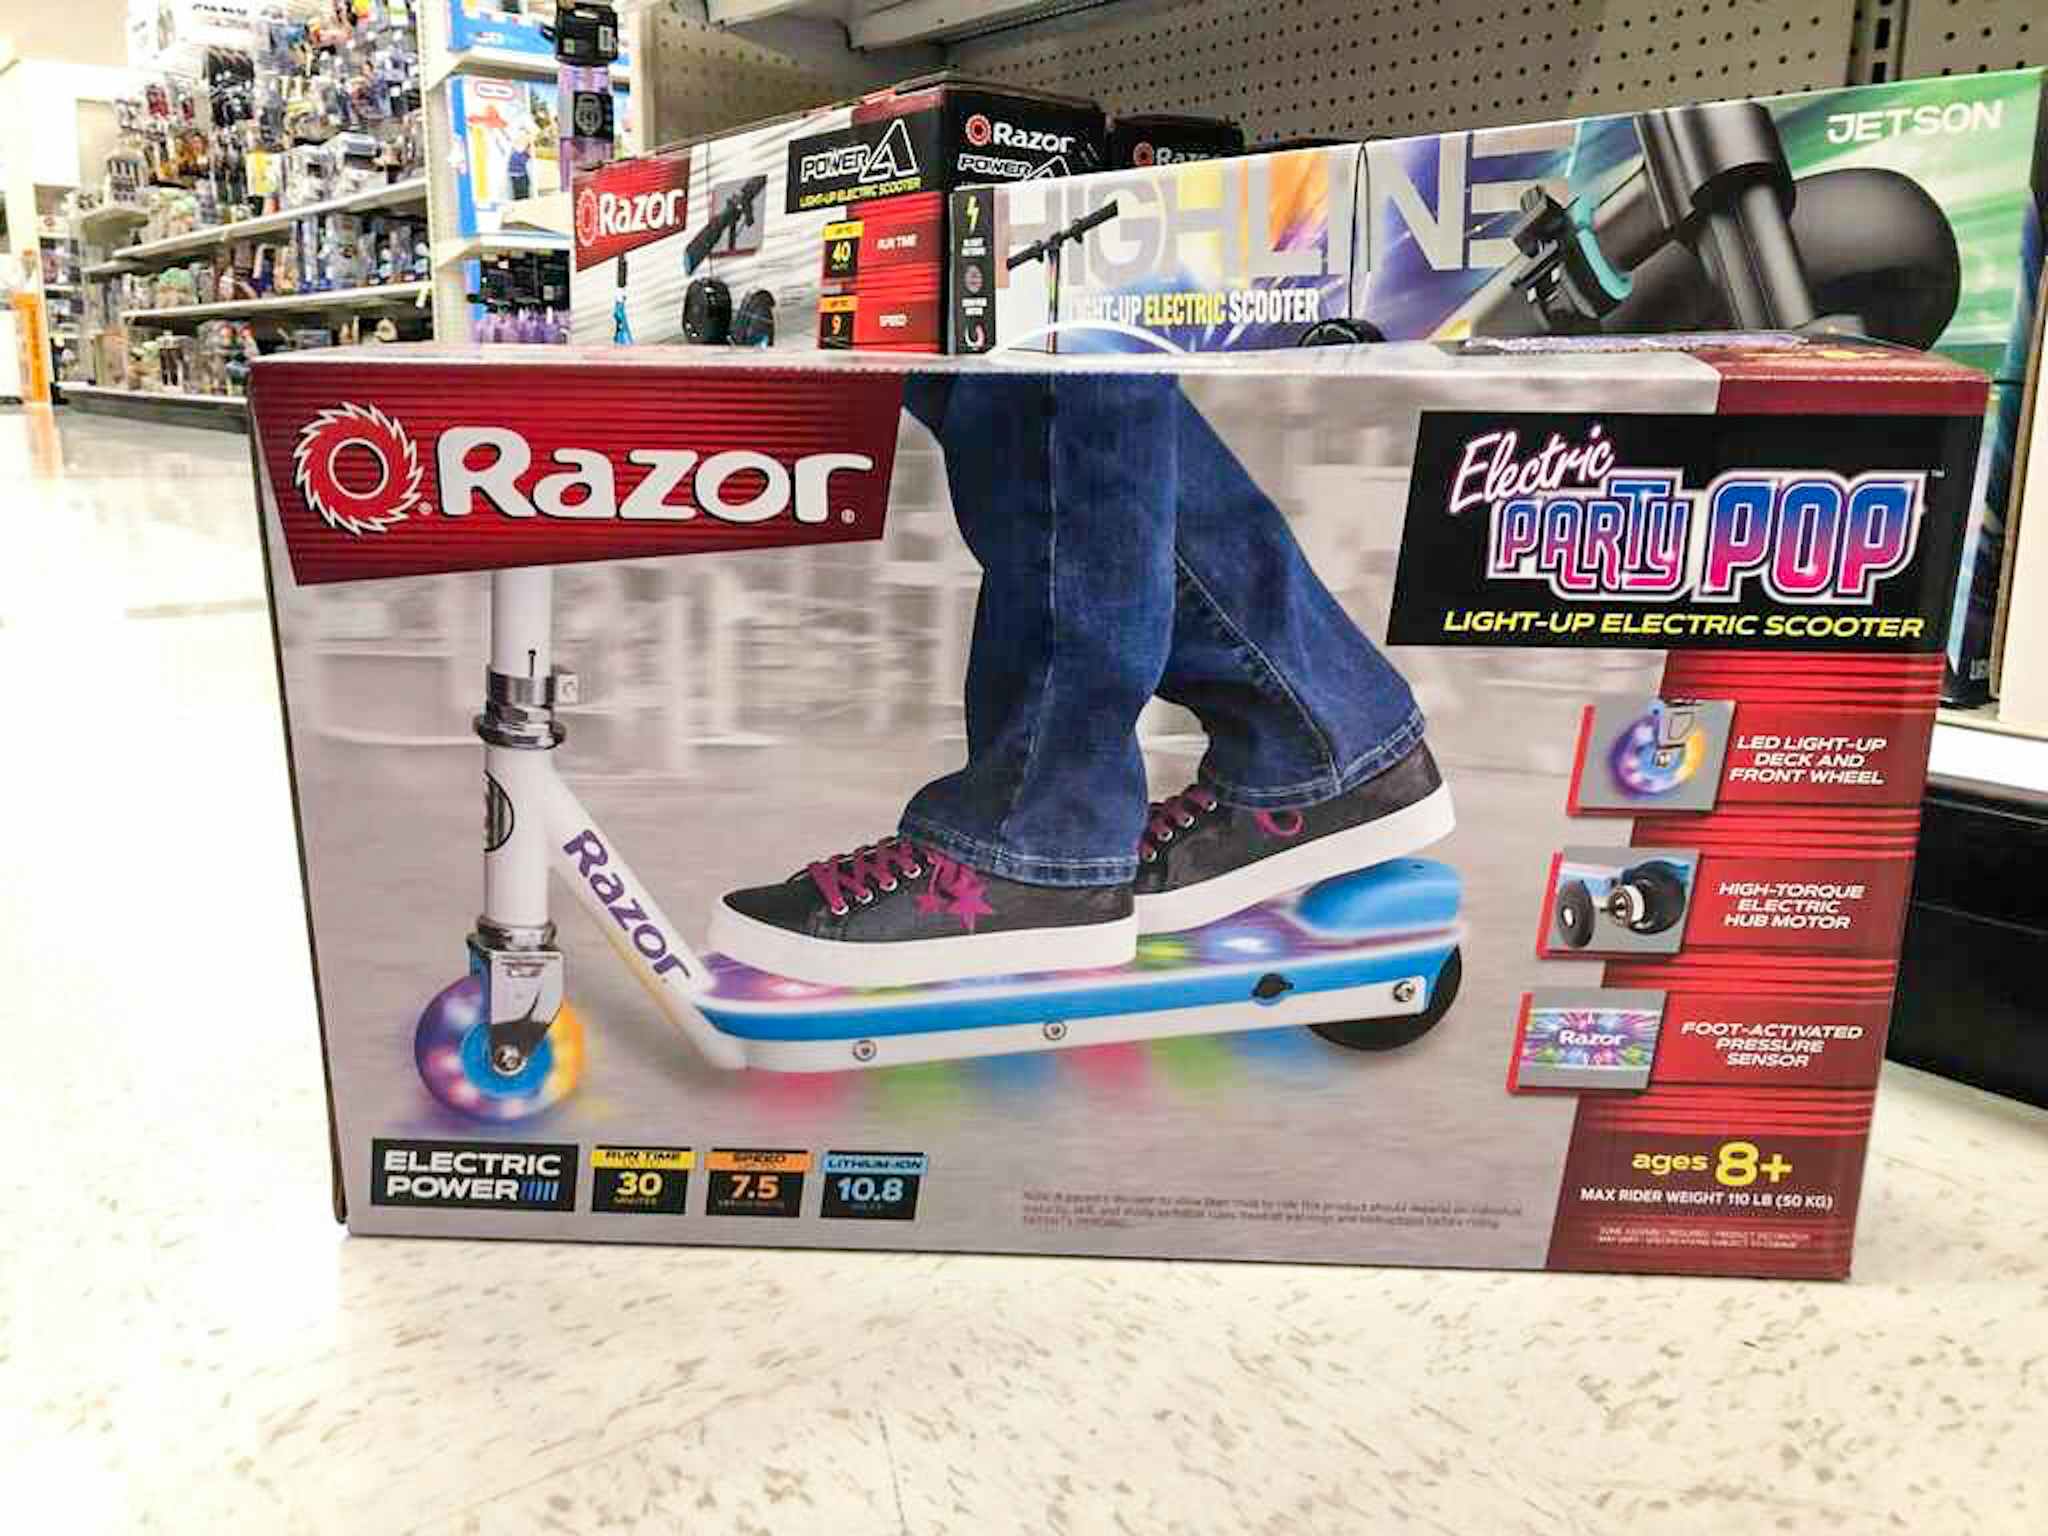 razor party pop electric scooter at target